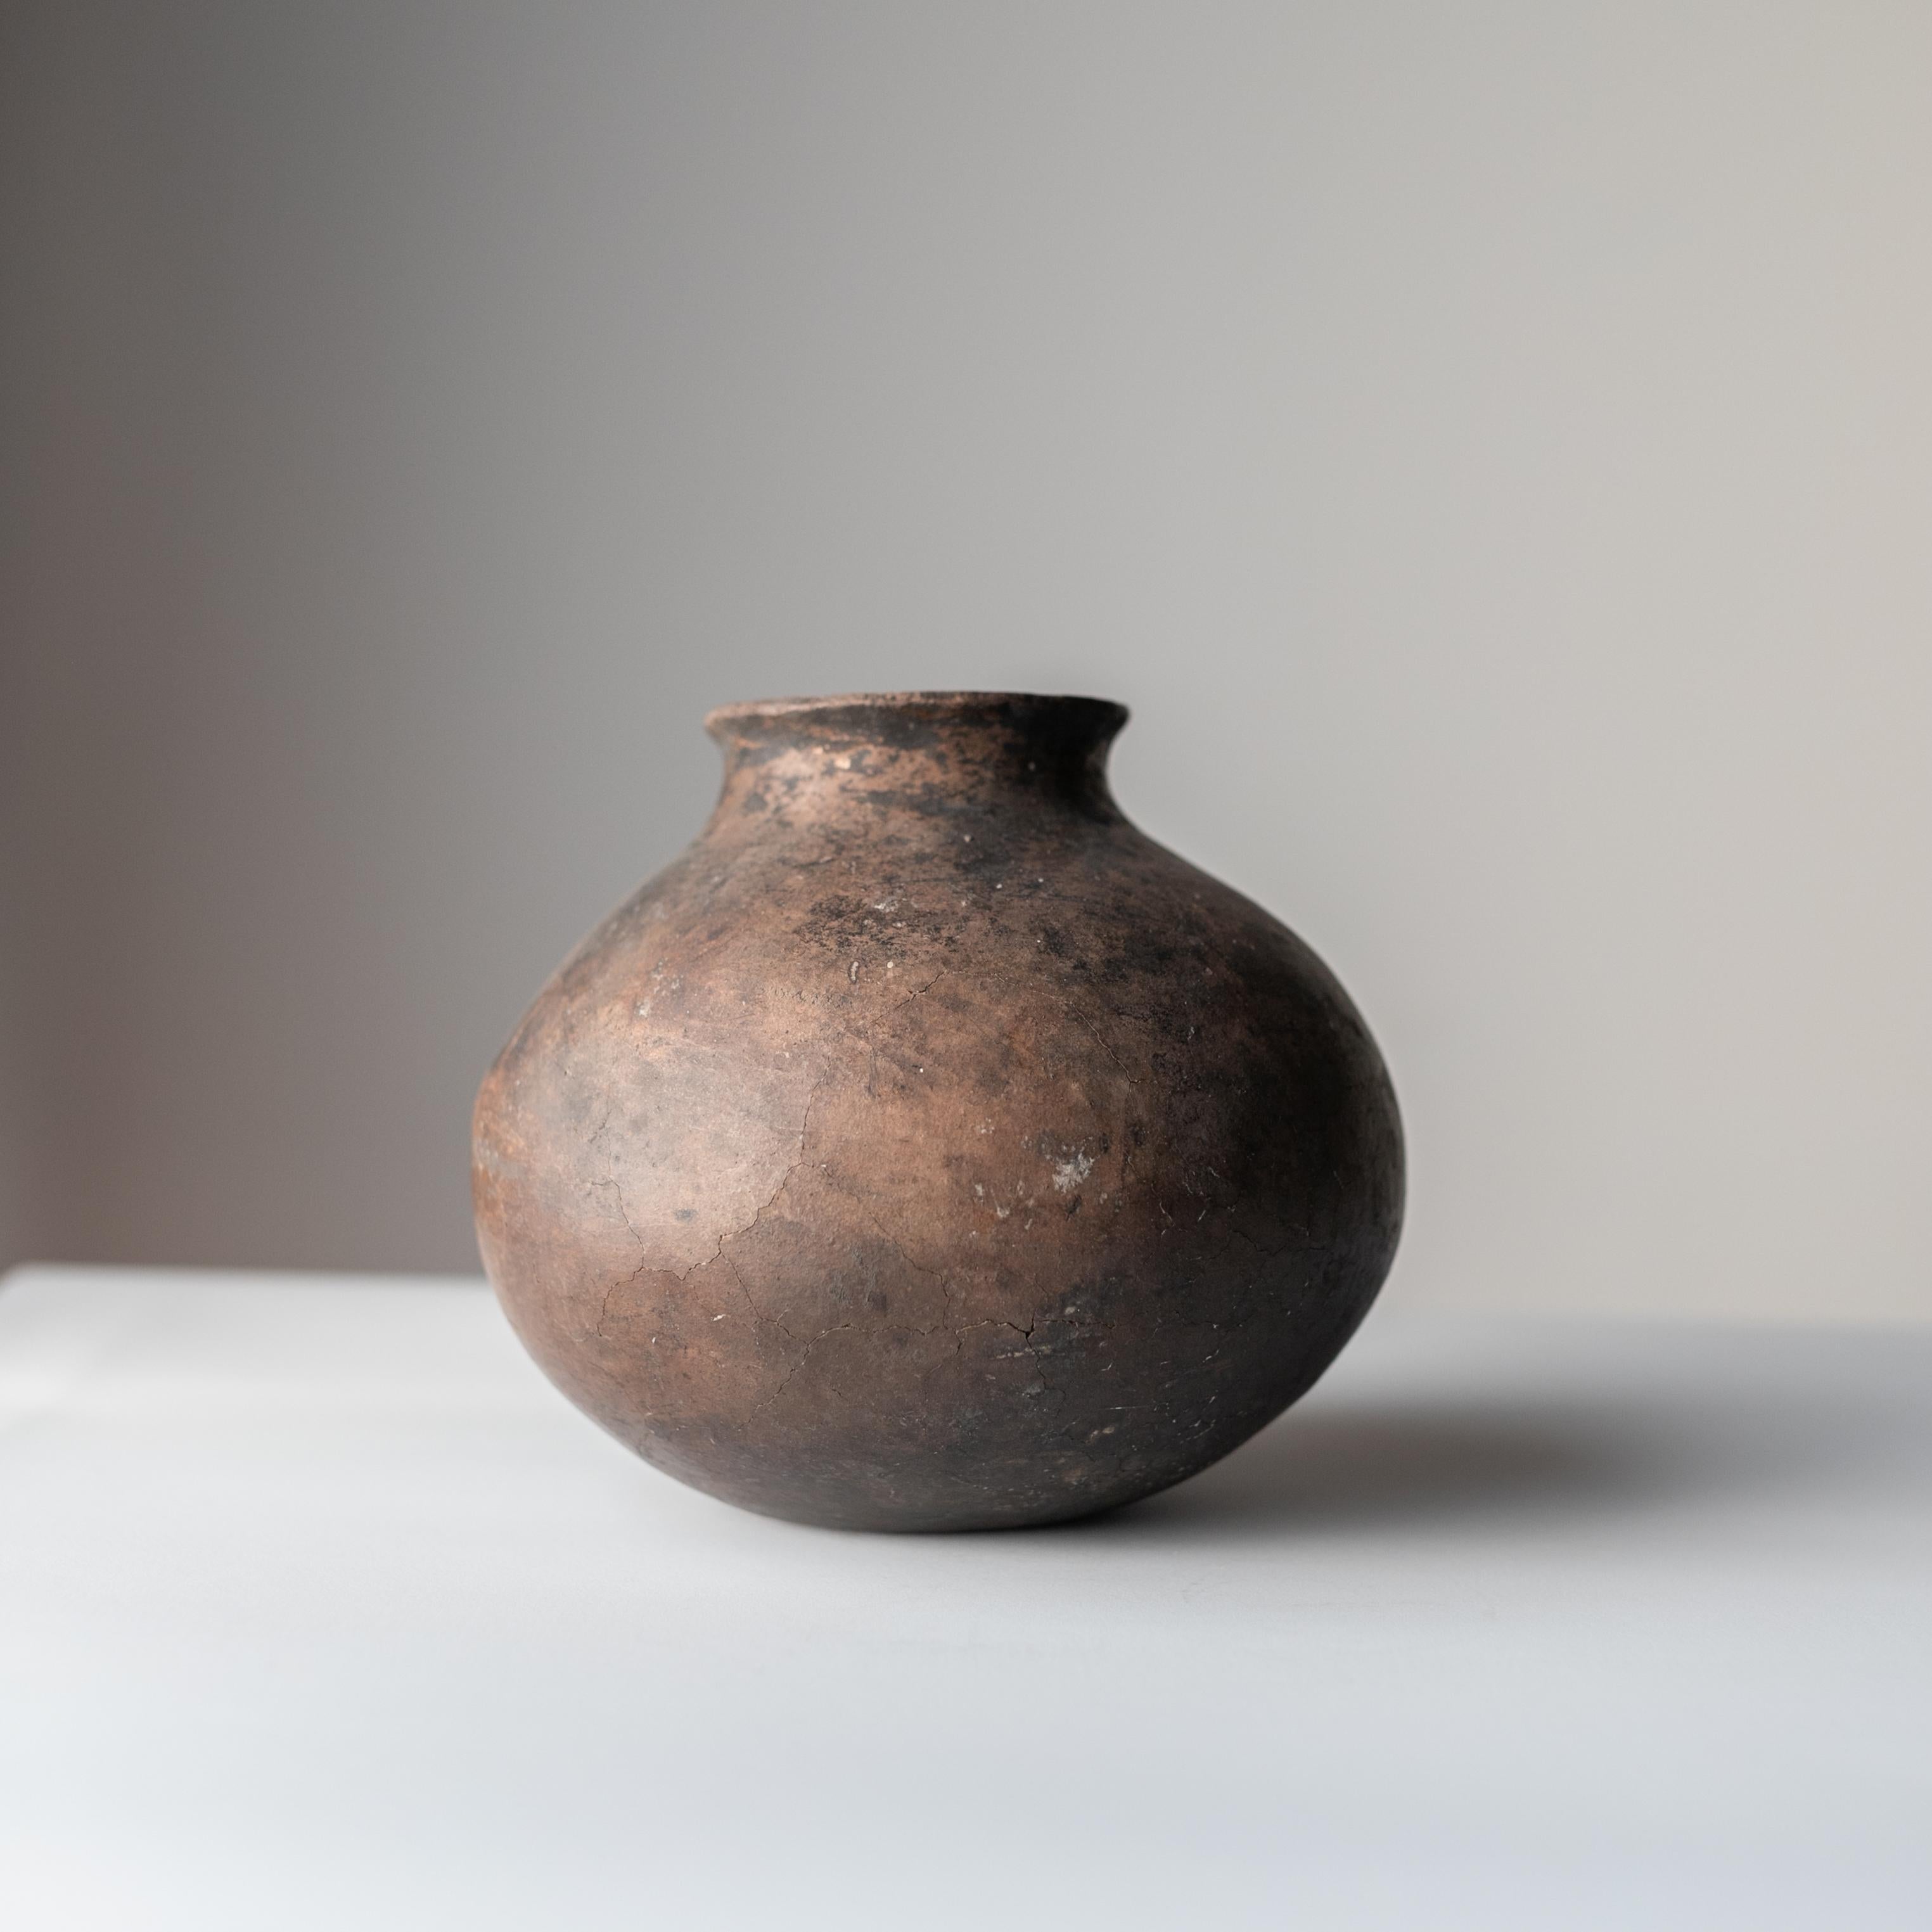 I would like to introduce you to a very beautiful form of time.
This is probably an earthenware vessel made in Peru, South America.
In Peru, there are many earthenware with many round curves, and many of them have polished and smooth surfaces.
There